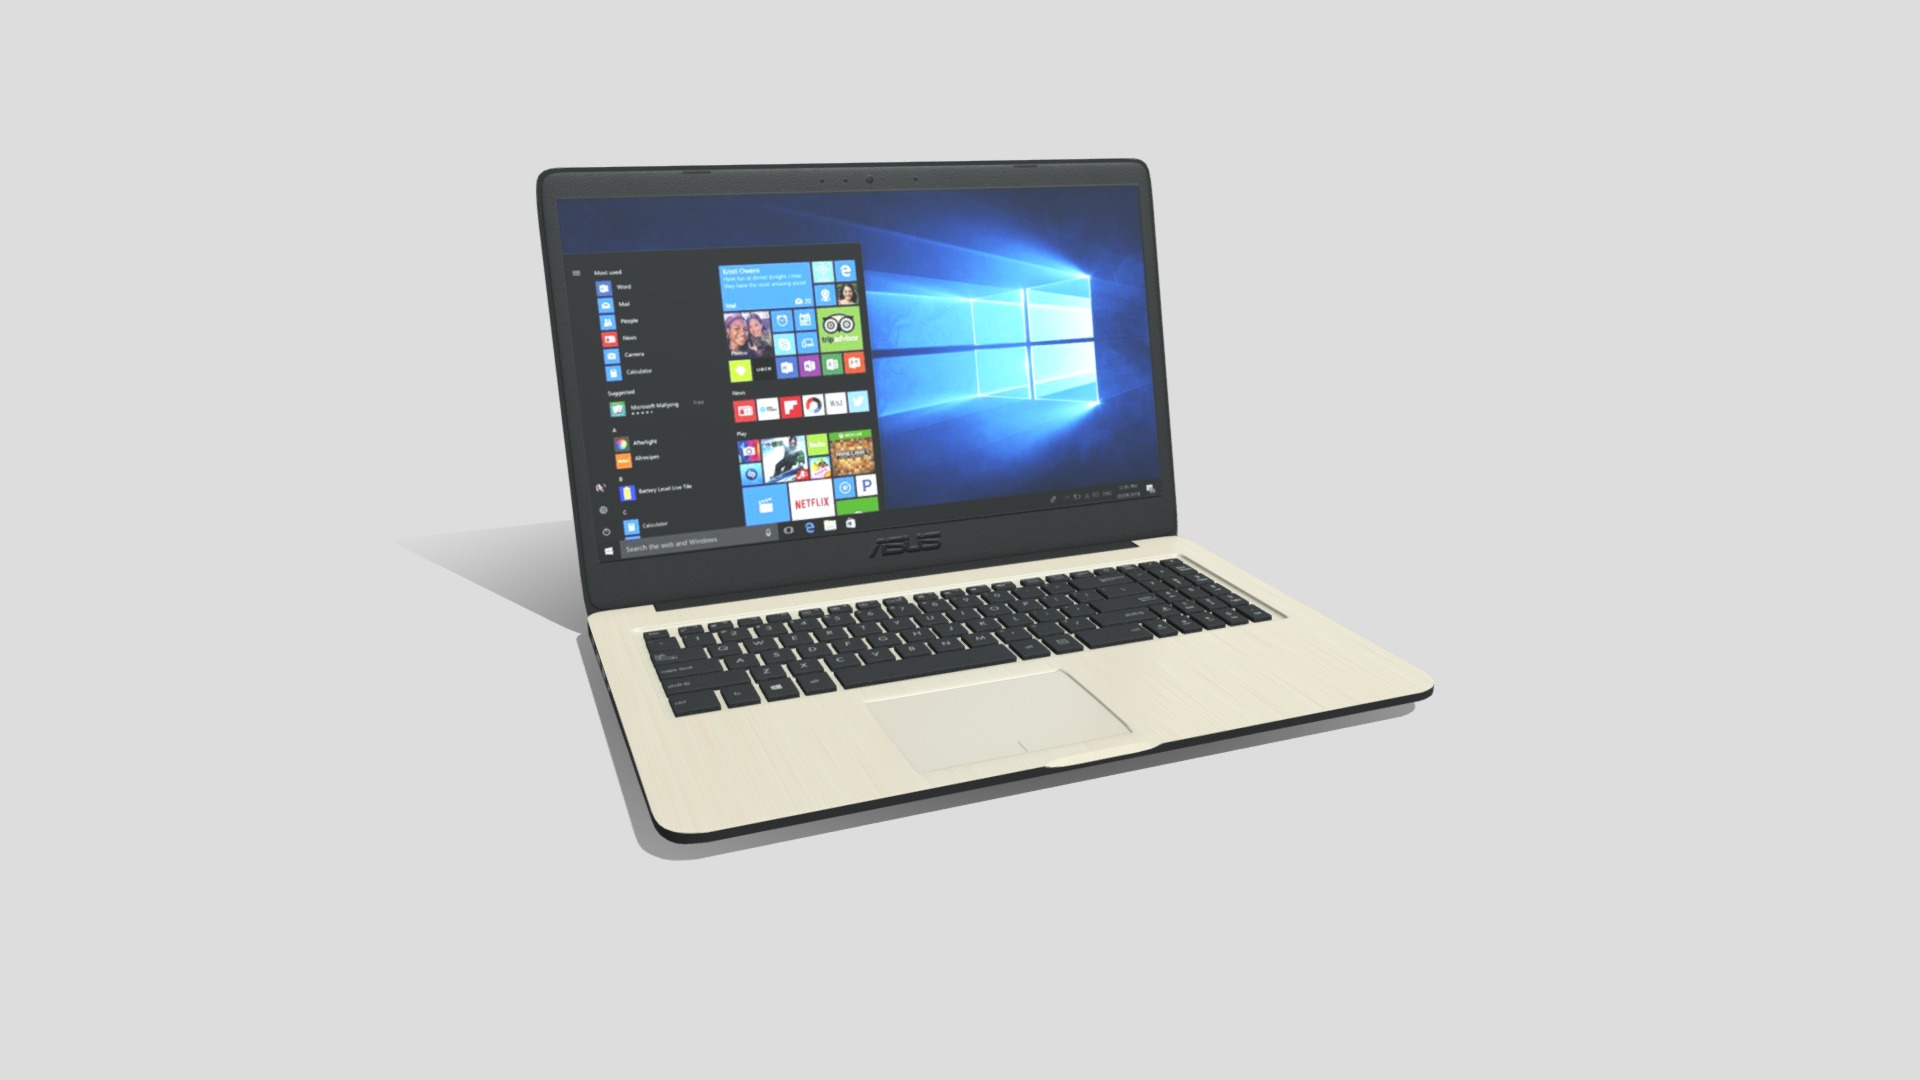 3D model Asus VivoBook X405UQ-BM182 (90NB0FN9-M02660) - This is a 3D model of the Asus VivoBook X405UQ-BM182 (90NB0FN9-M02660). The 3D model is about a laptop with a keyboard.